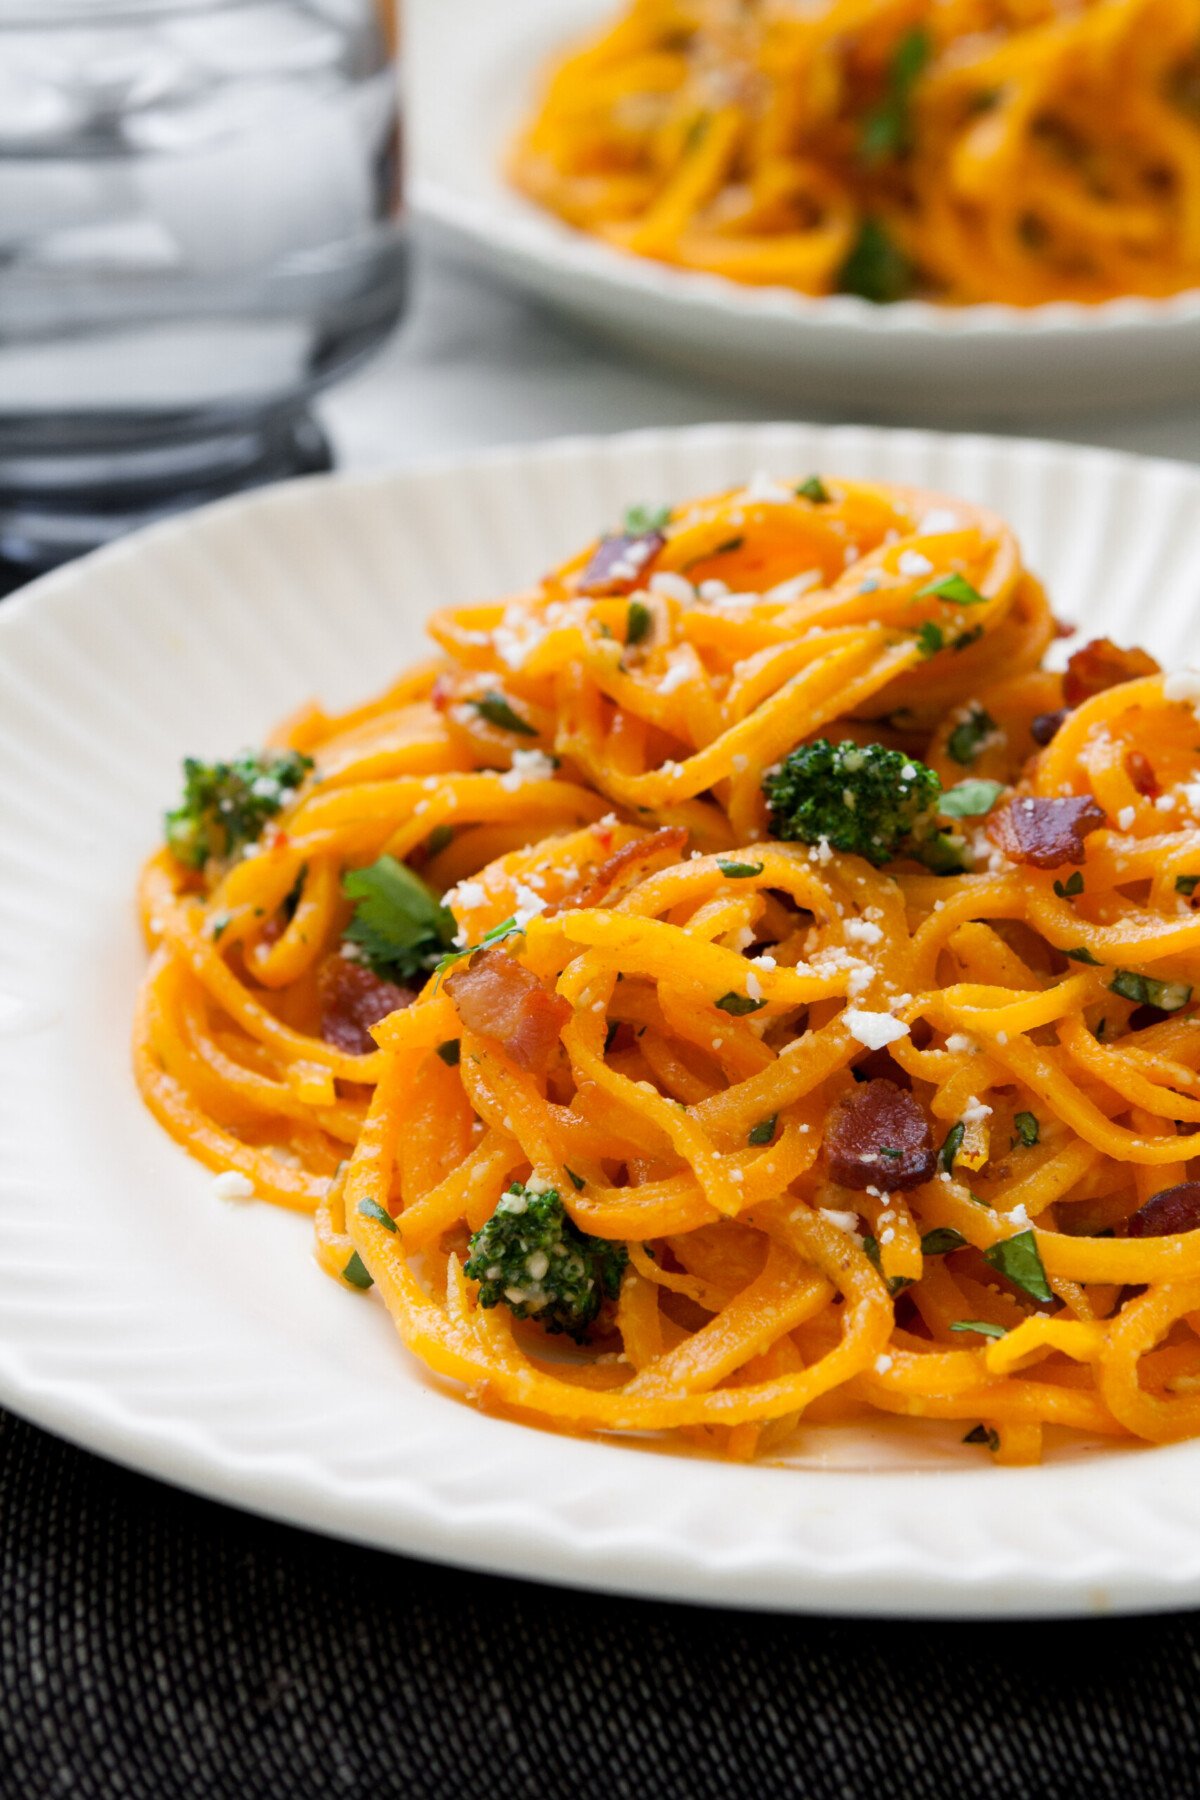 orange noodles coiled on a white plate topped with broccoli and bacon.